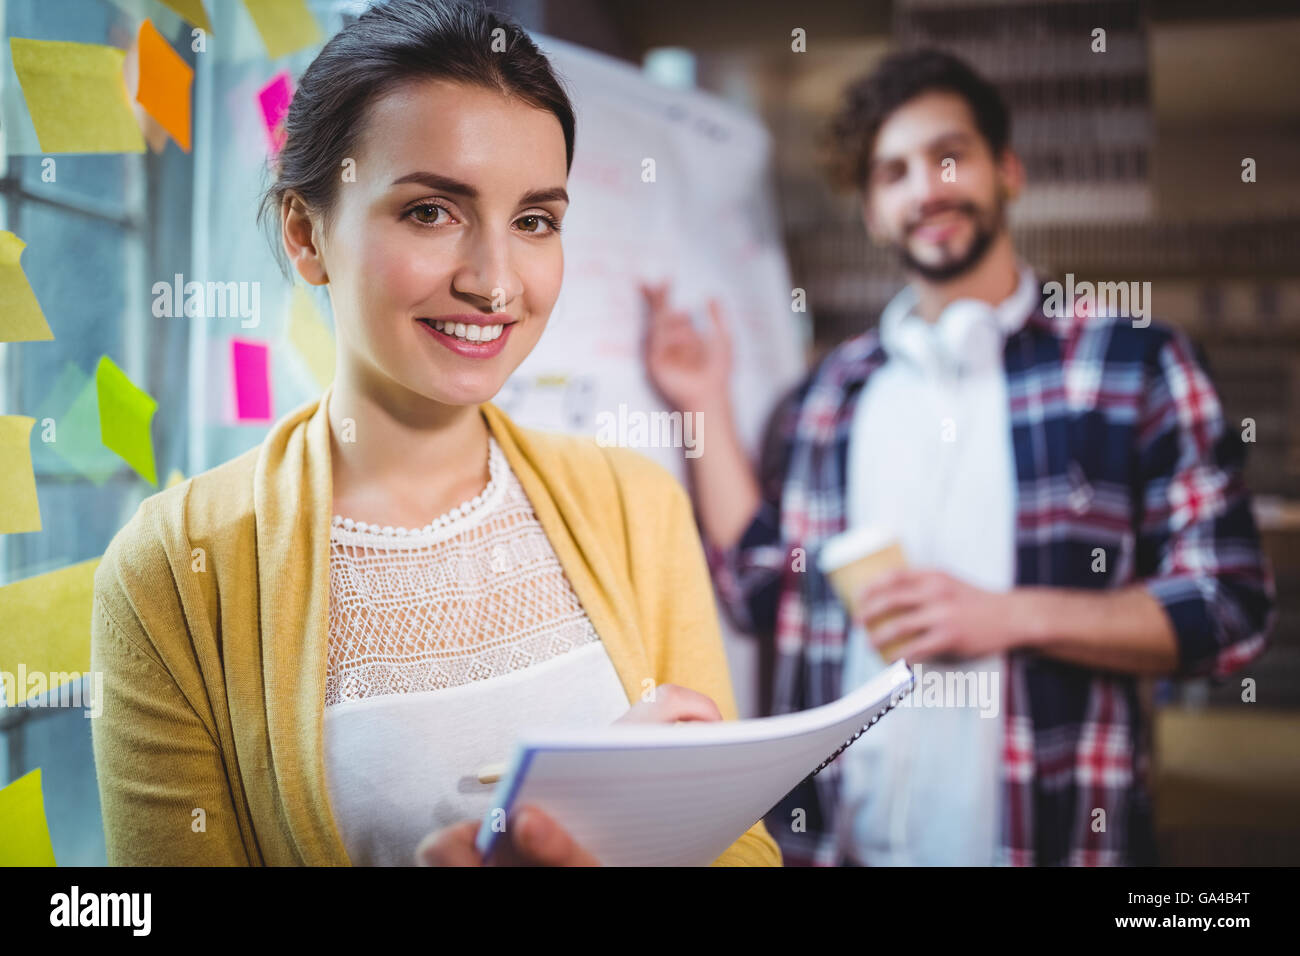 Businesswoman smiling while male colleague in background Stock Photo